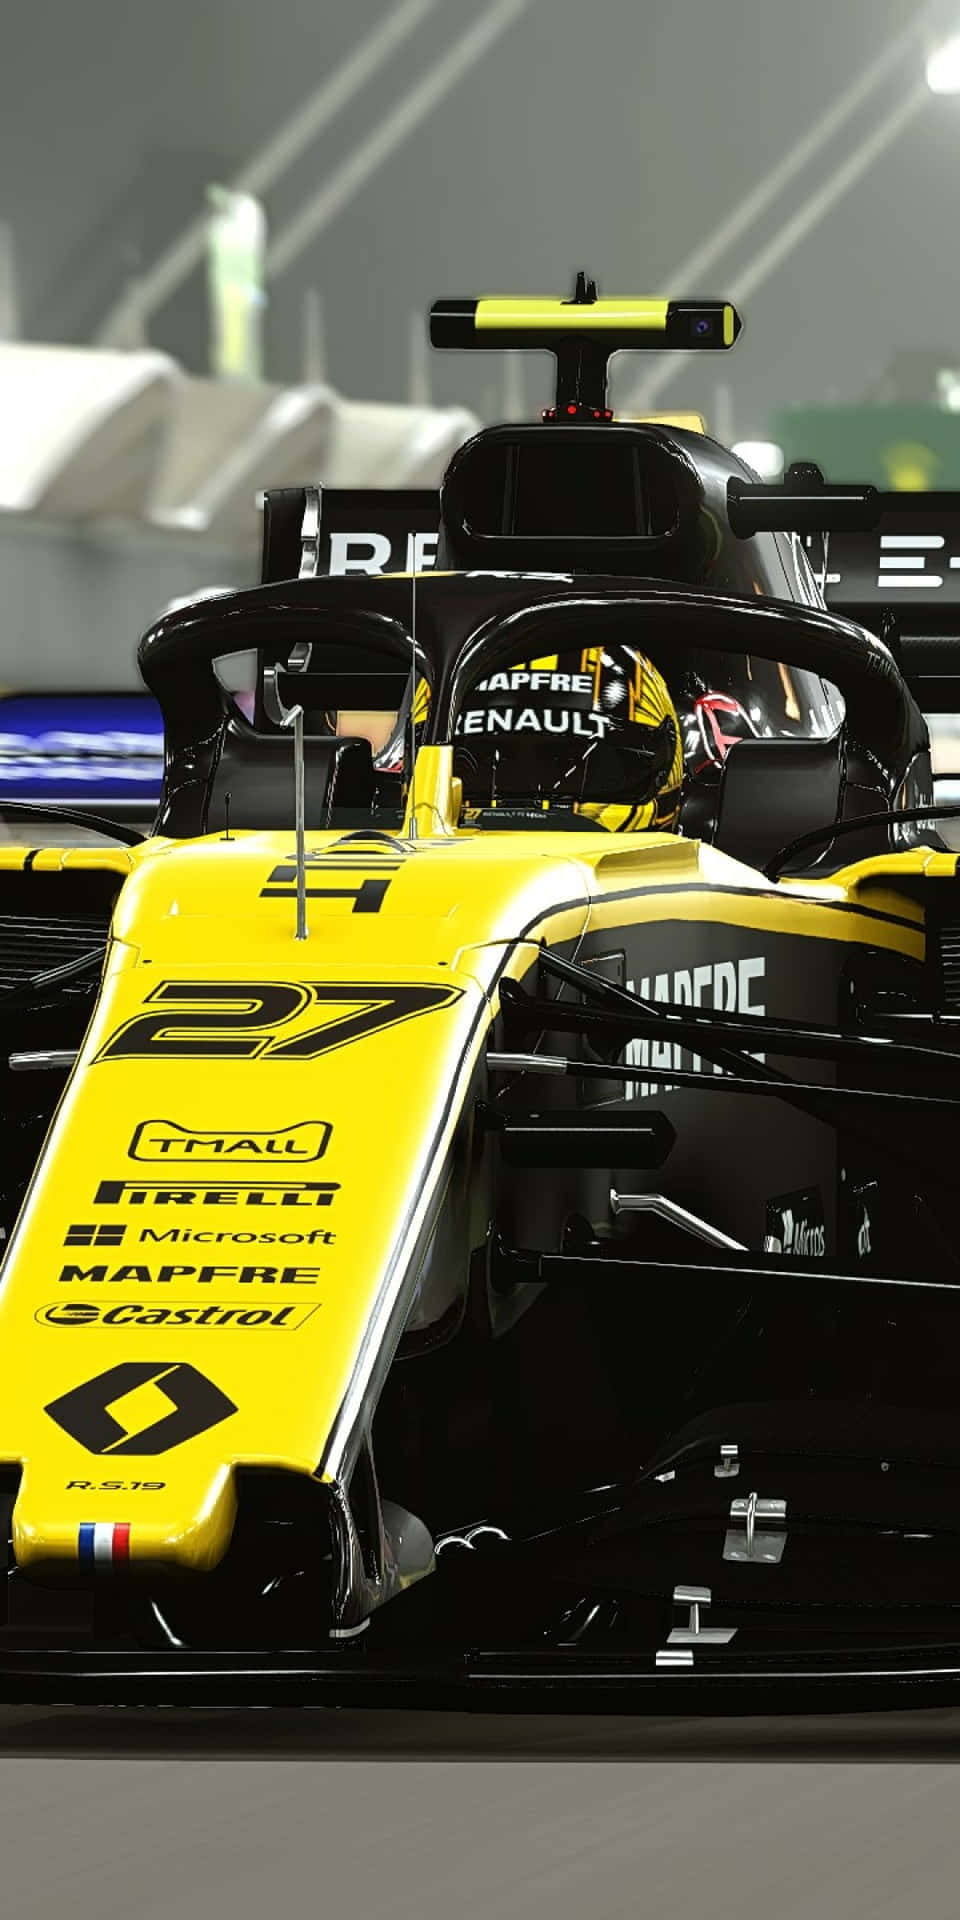 a yellow and black racing car is driving at night